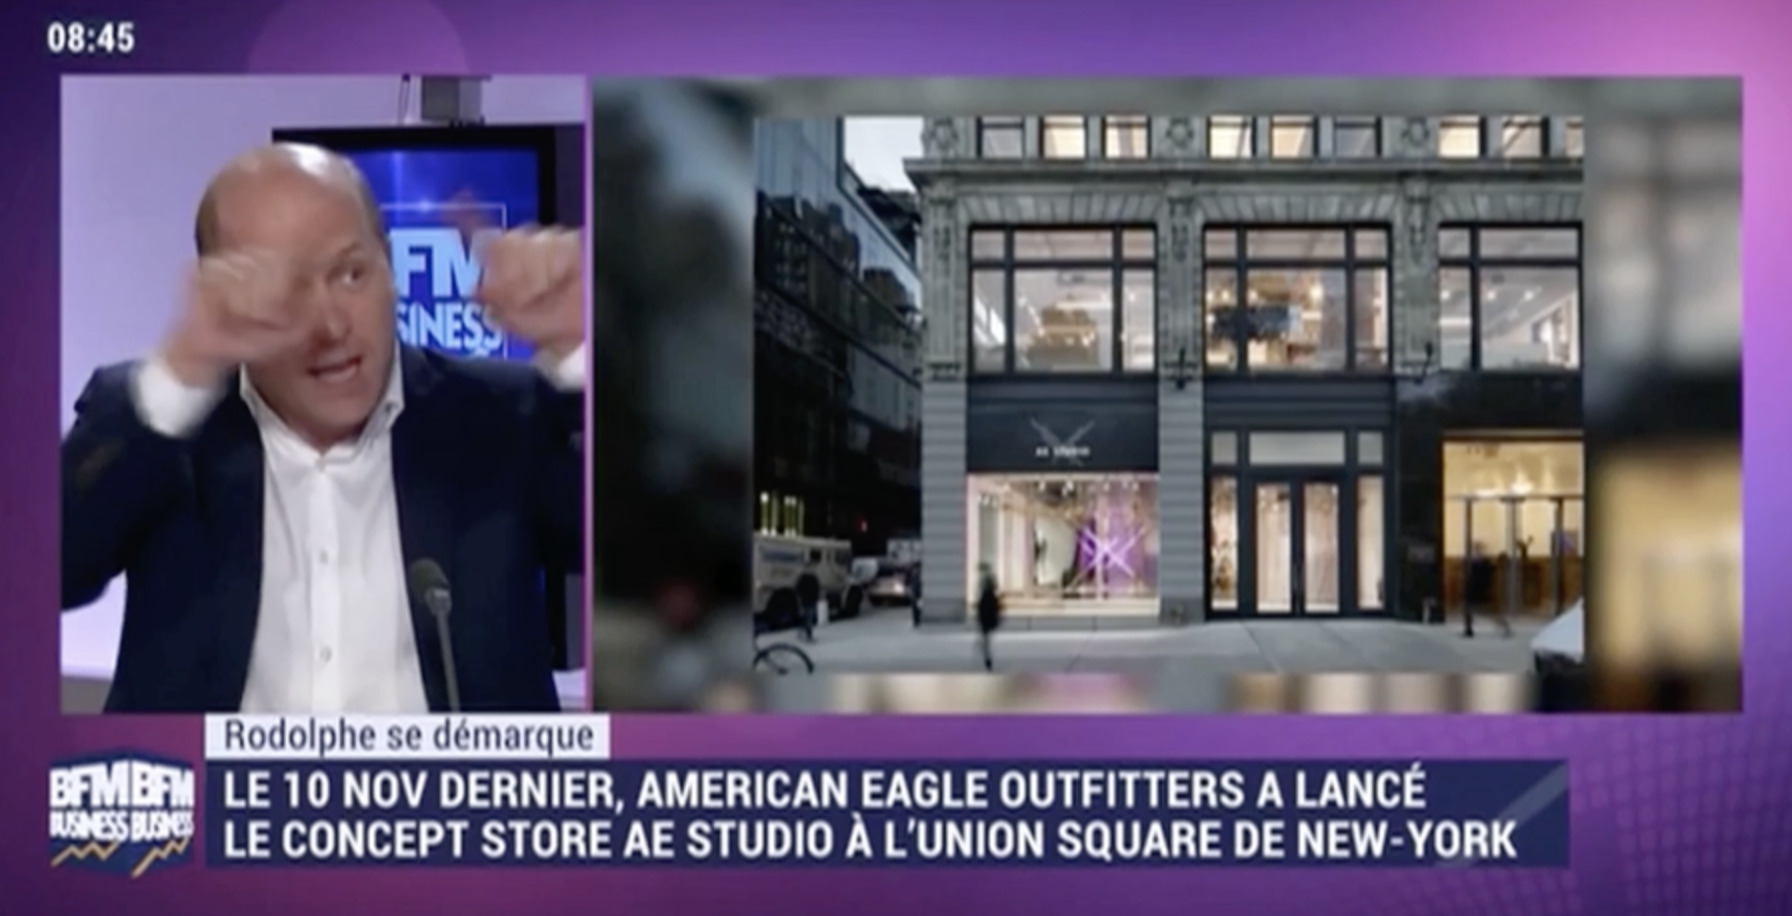 AMERICAN EAGLE OUTFITTERS ET SON STORE MULTIFACETTES / INNOVER POUR LE COMMERCE